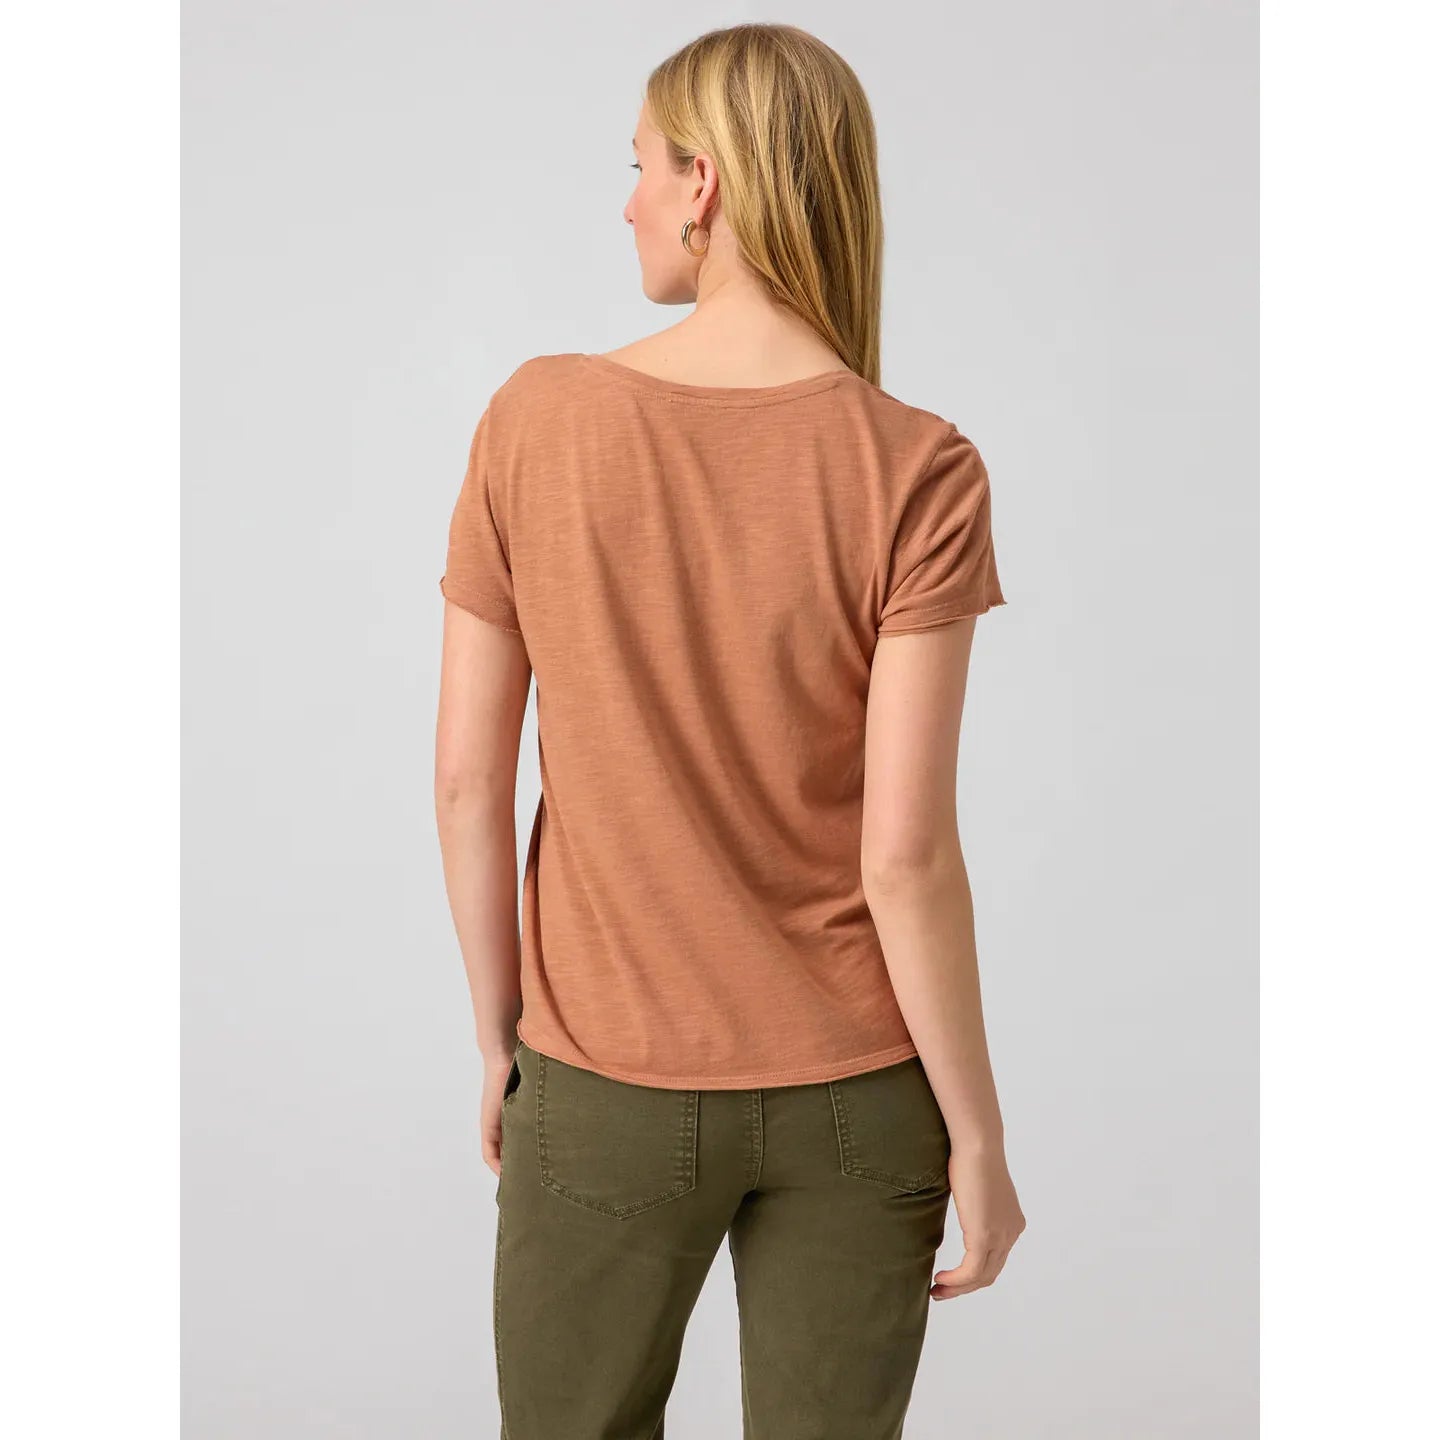 Sanctuary - Carefree Tee in Mocha Mousse